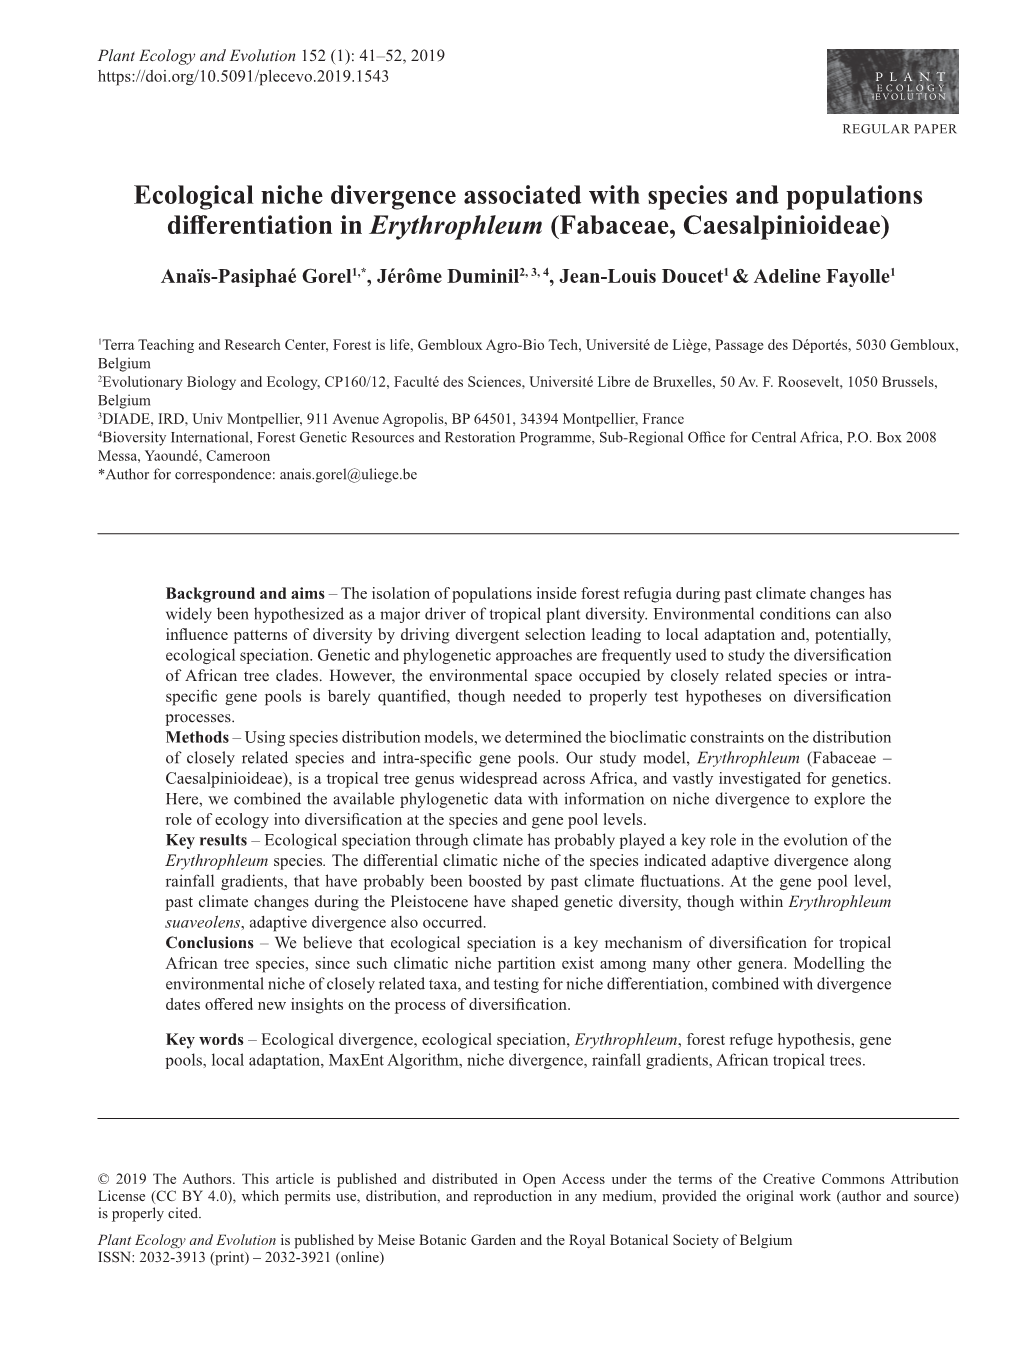 Ecological Niche Divergence Associated with Species and Populations Differentiation Inerythrophleum (Fabaceae, Caesalpinioideae)